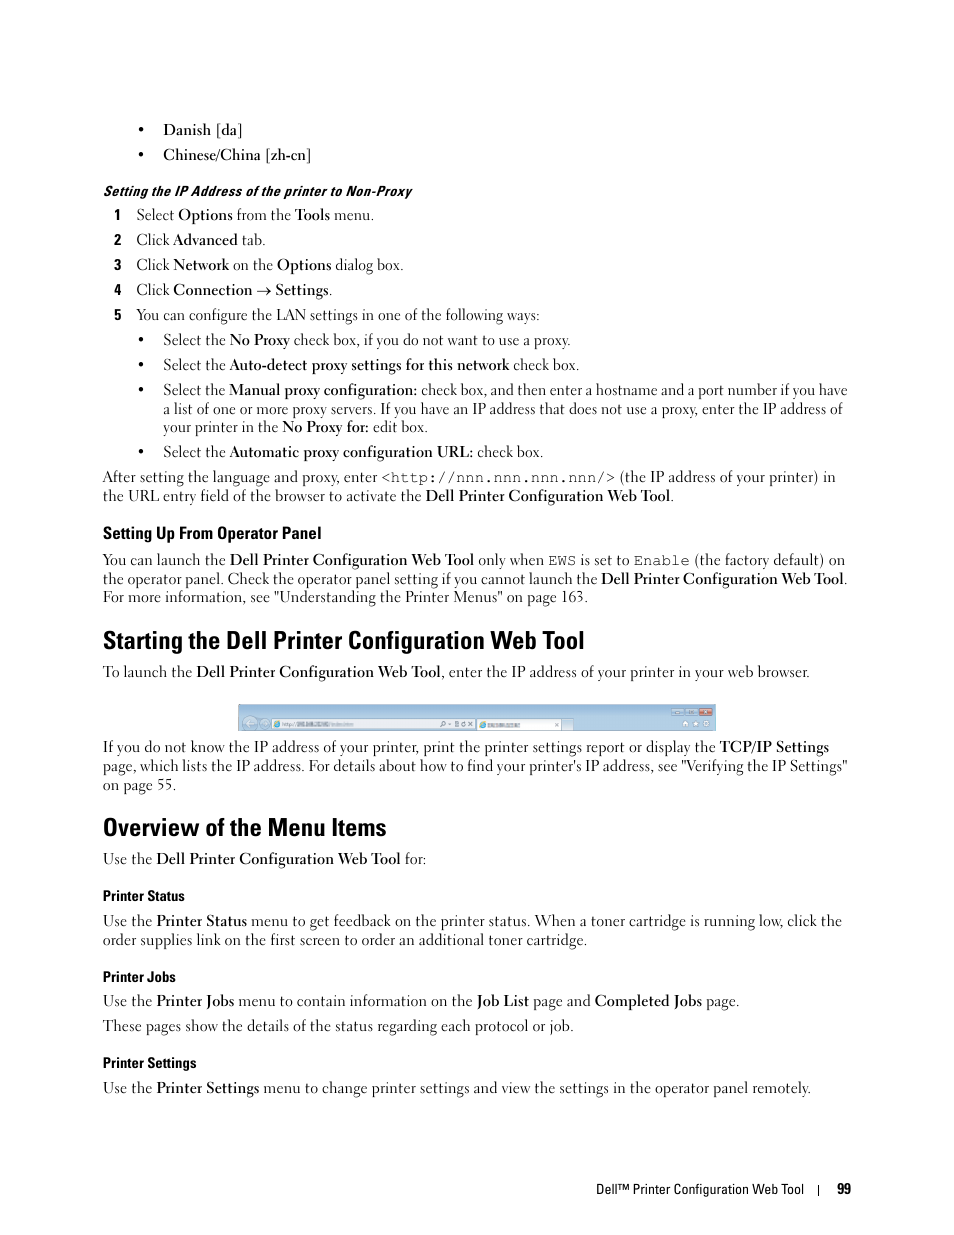 Setting up from operator panel, Starting the dell printer configuration web  tool, Overview of the menu items | Dell C1765NFW MFP Laser Printer User  Manual | Page 101 / 382